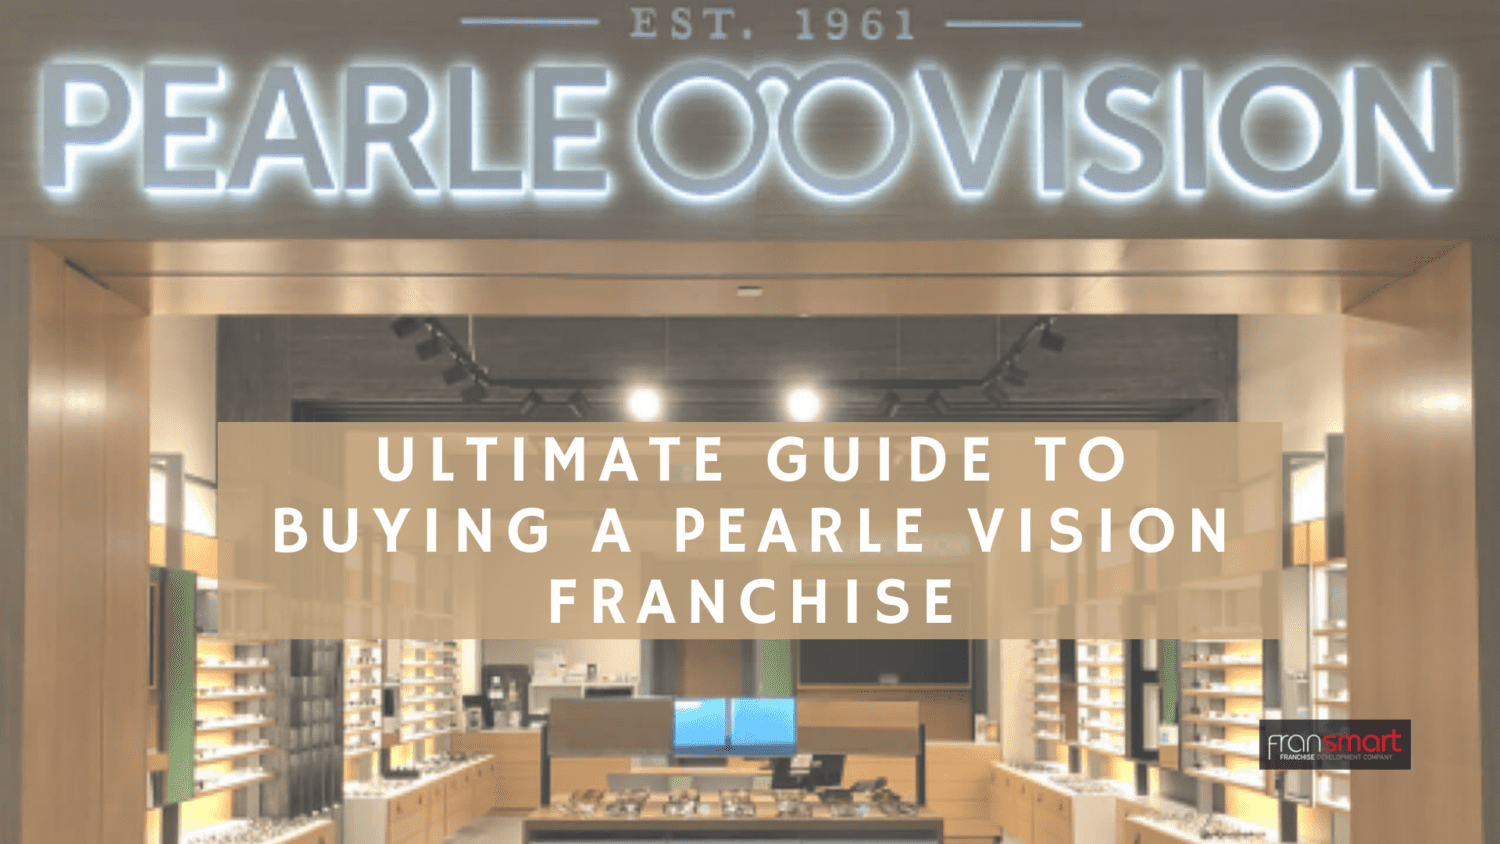 Guide to Buying a Pearle Vision Franchise